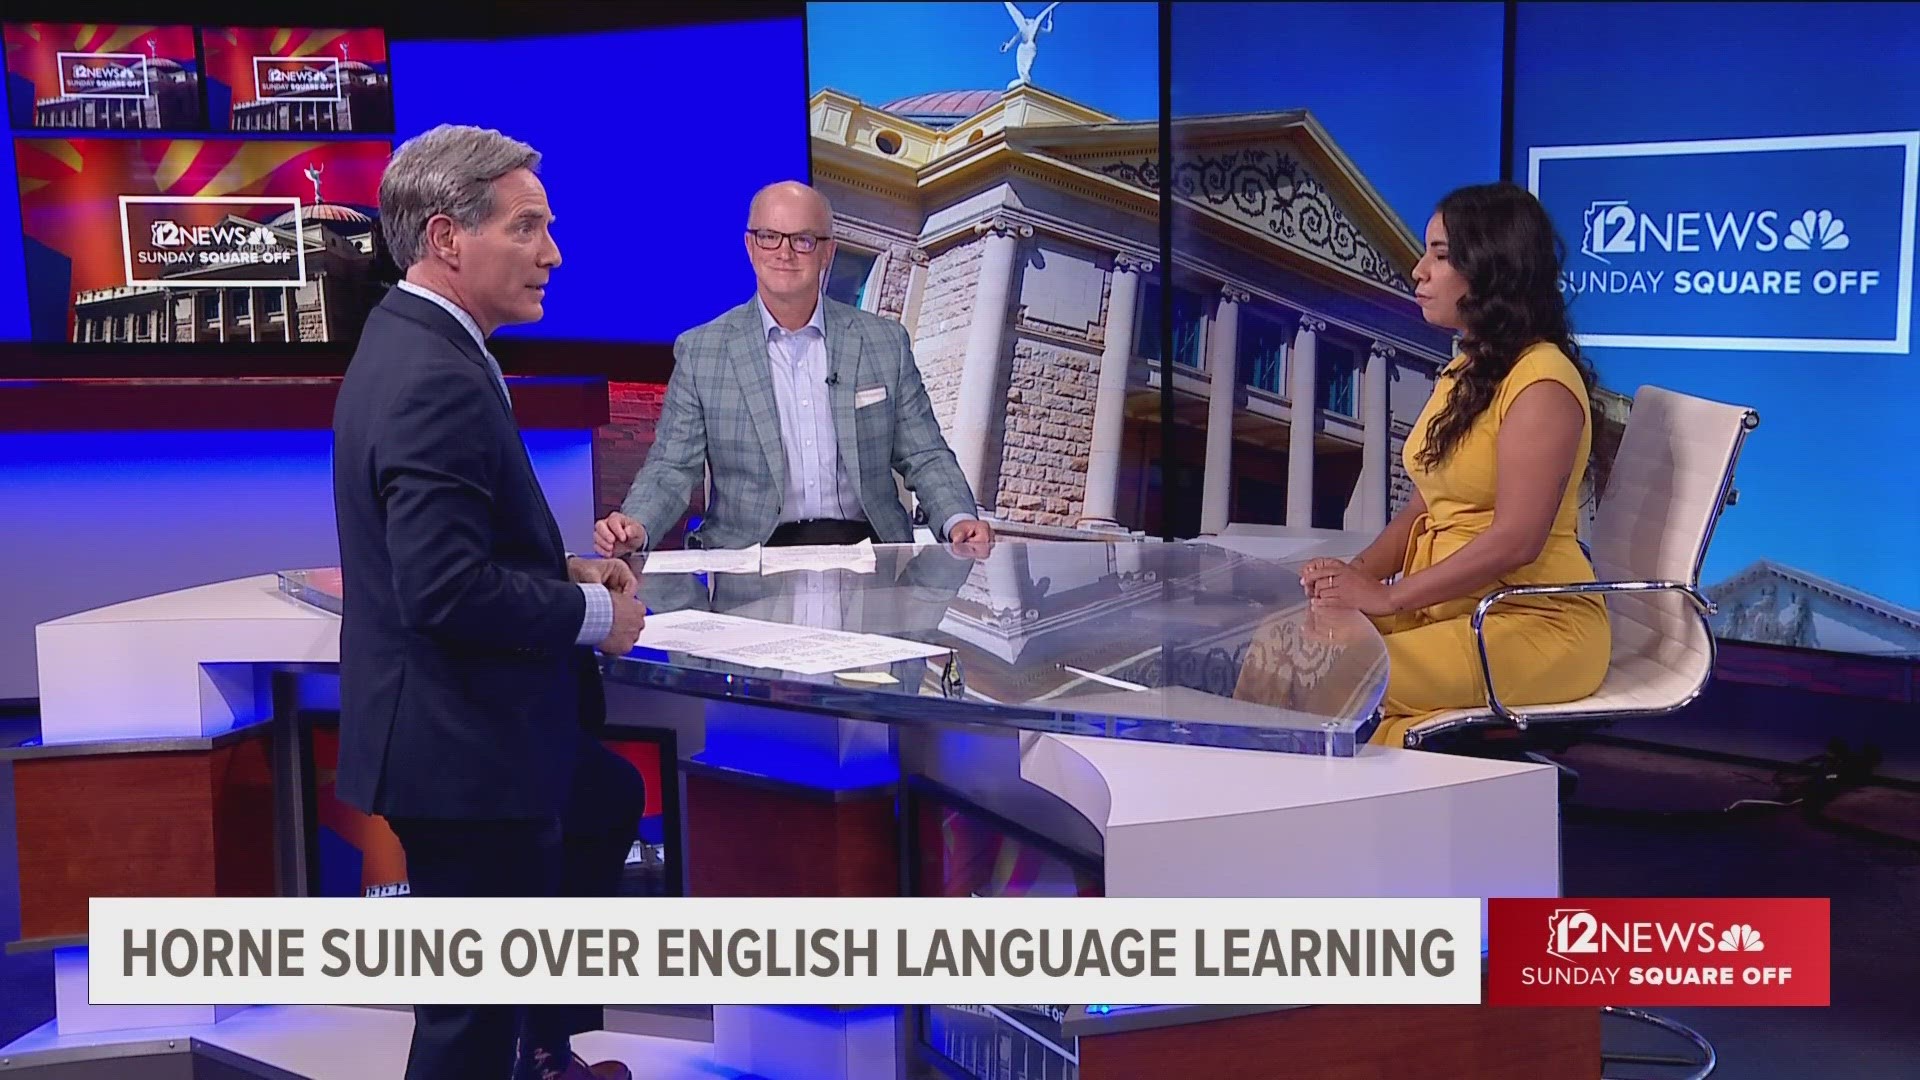 Horne has filed a lawsuit to block dual-language learning programs to teach English as a second language. Why is Horne pursuing the case and could he win?